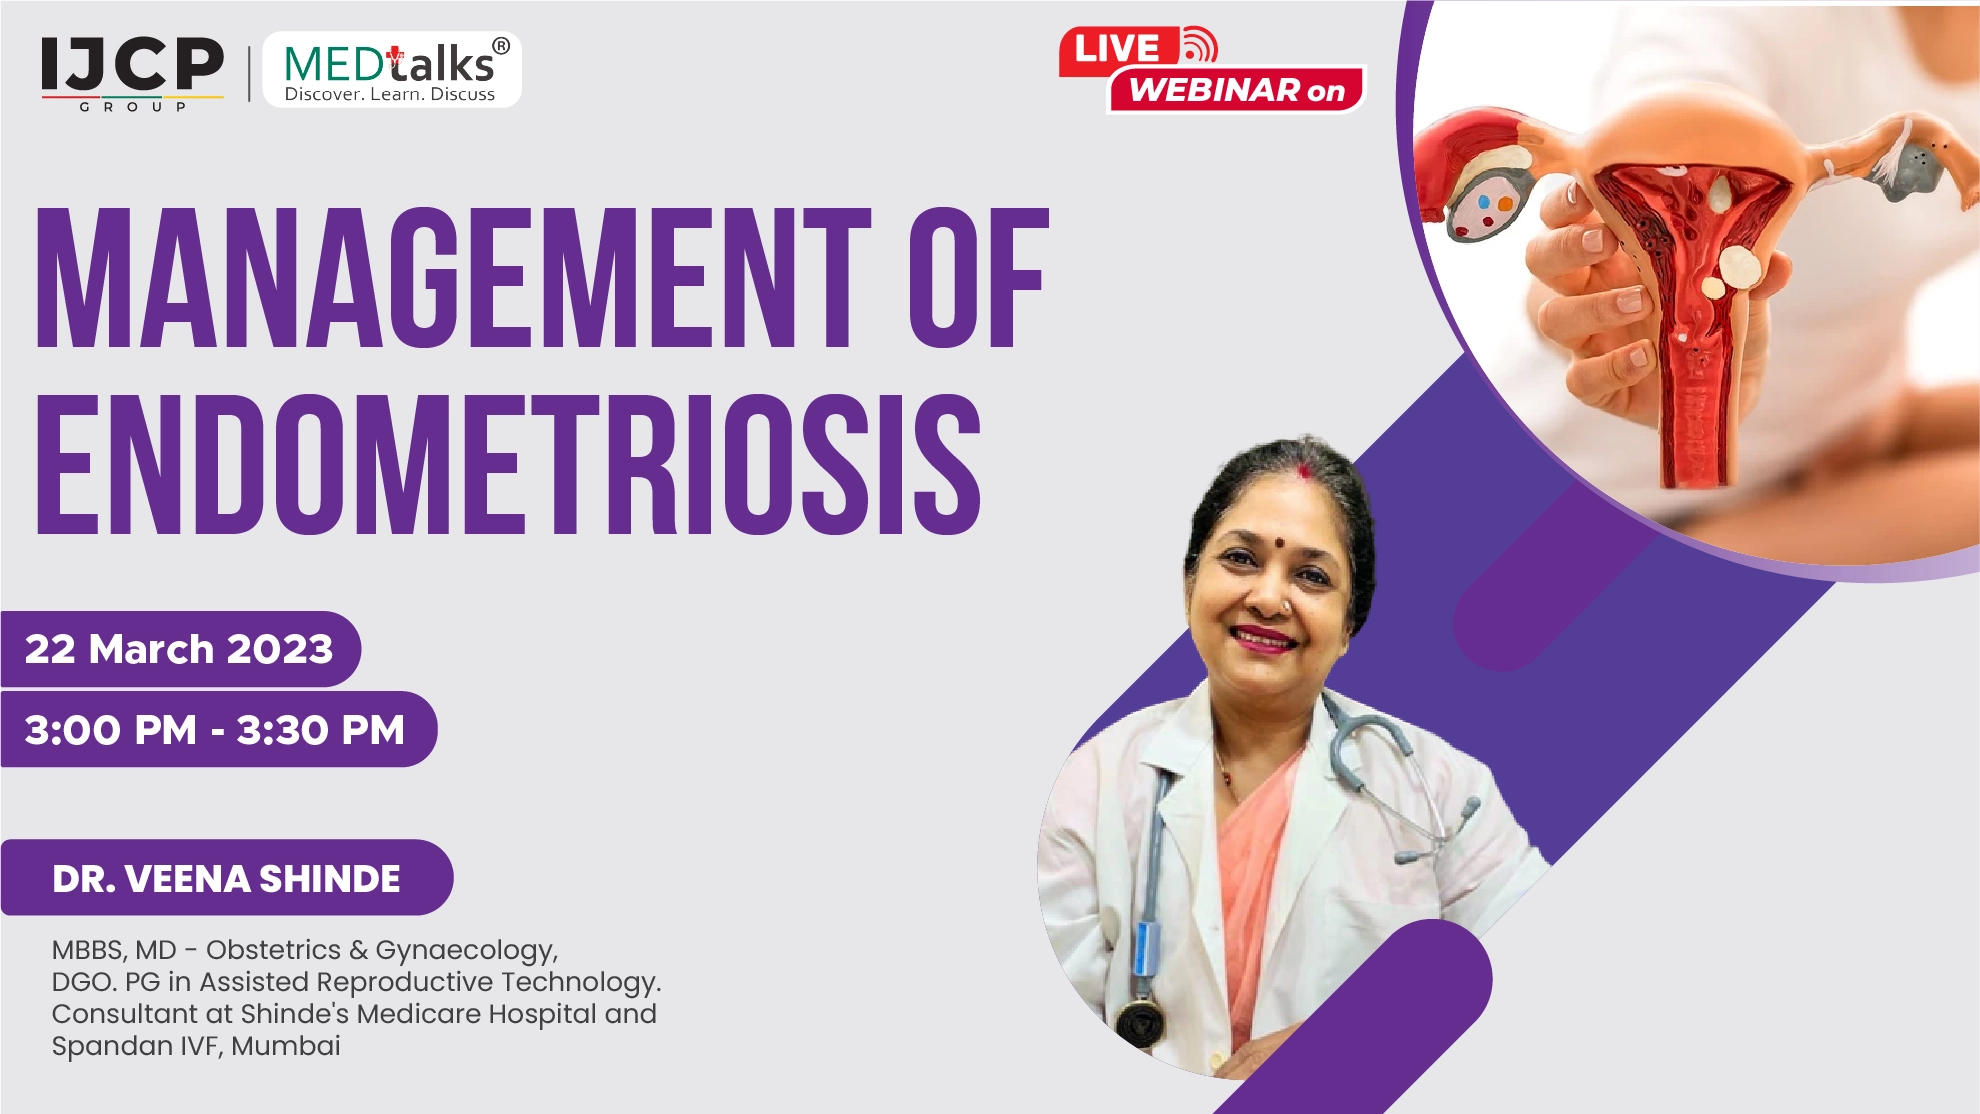 Management of Endometriosis- A Live session with Dr. Veena Shinde